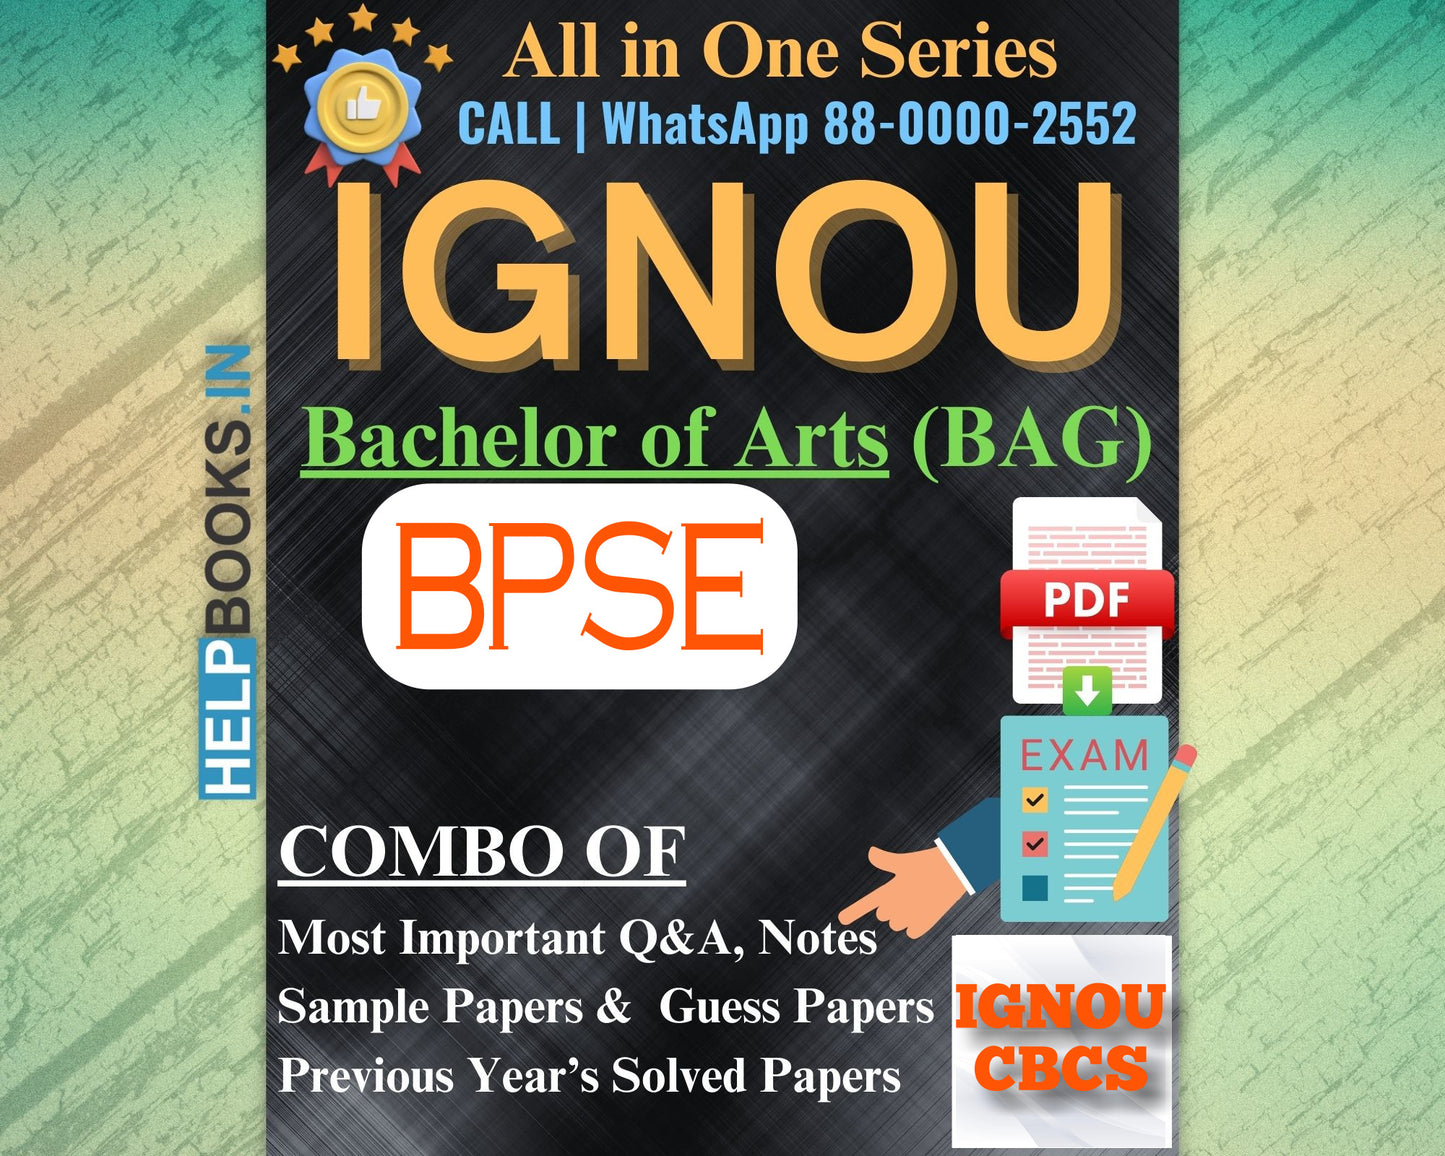 IGNOU BAG Online Study Package: Bachelor of Arts (BA) - Previous Years Solved Papers, Q&A, Exam Notes, Sample Papers, Guess Papers-BPSE141, BPSE142, BPSE143, BPSE144, BPSE145, BPSE146